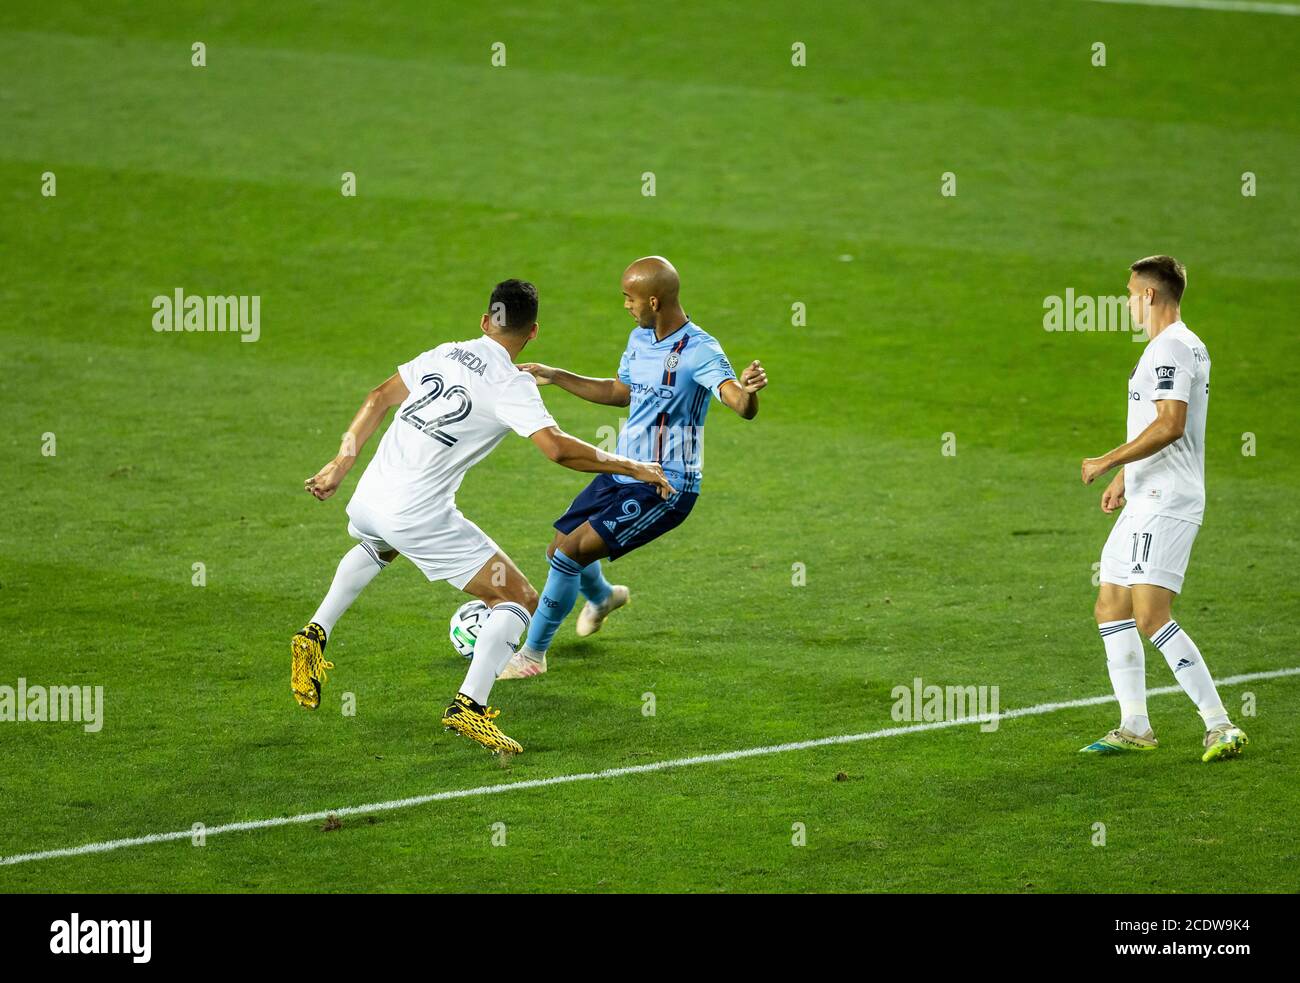 Harrison, NJ - August 29, 2020: Heber (9) of NYCFC controls ball during MLS regular season game against Chicago Fire FC at Red Bull Arena Stock Photo